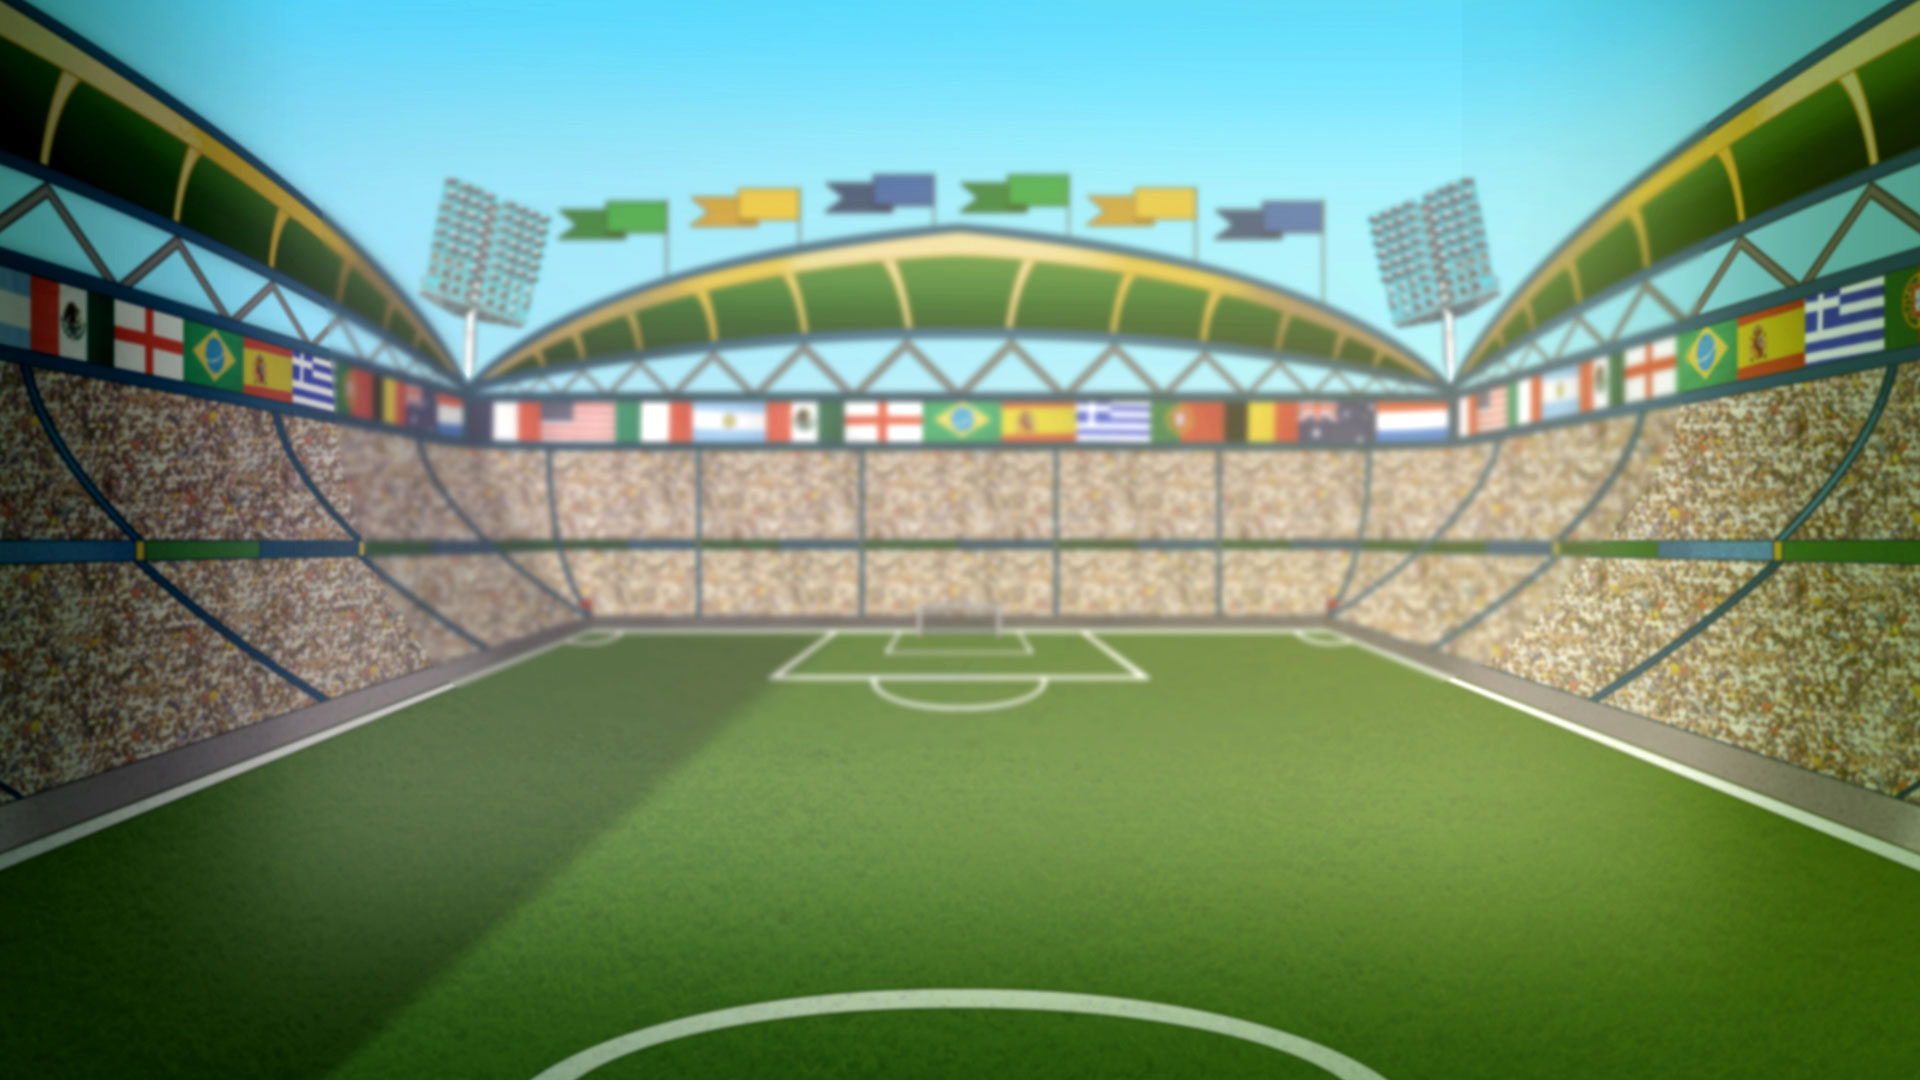 Game hight resolution background Carnival Cup